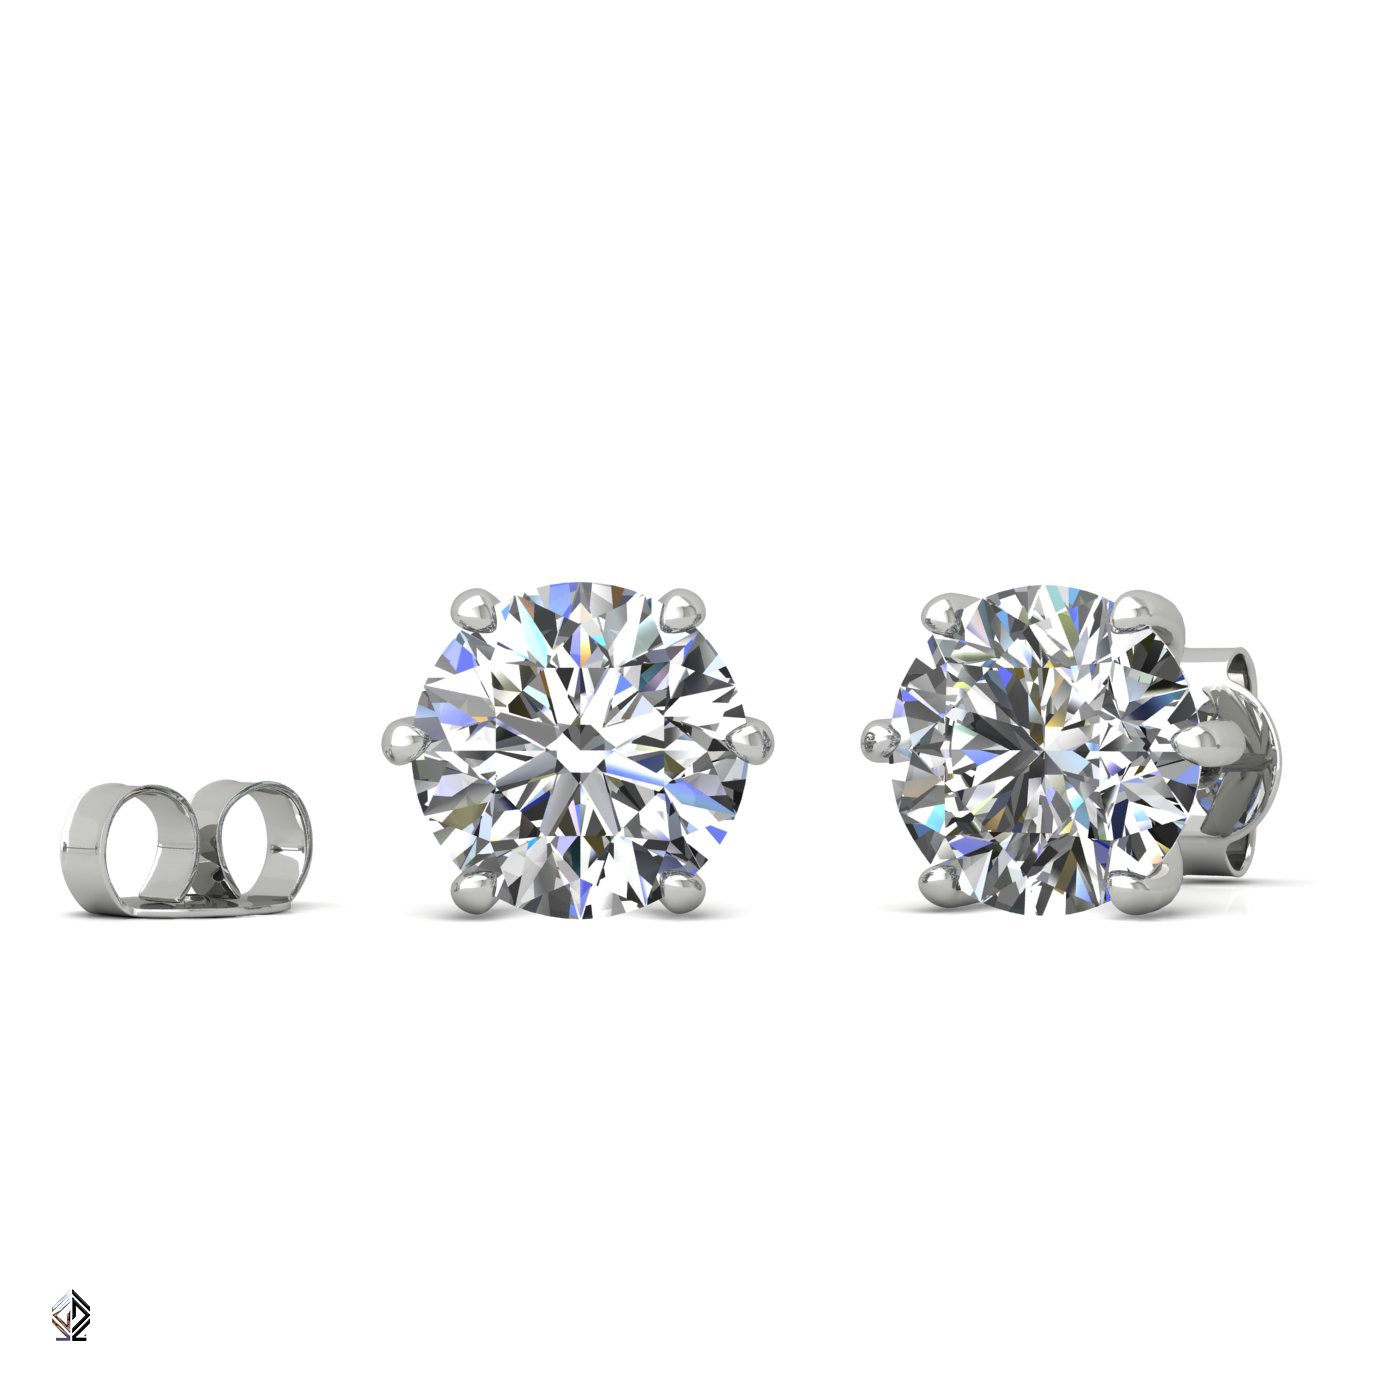 18k white gold 2.0 ct each (4,0 tcw) 6 prongs round shape diamond earrings Photos & images